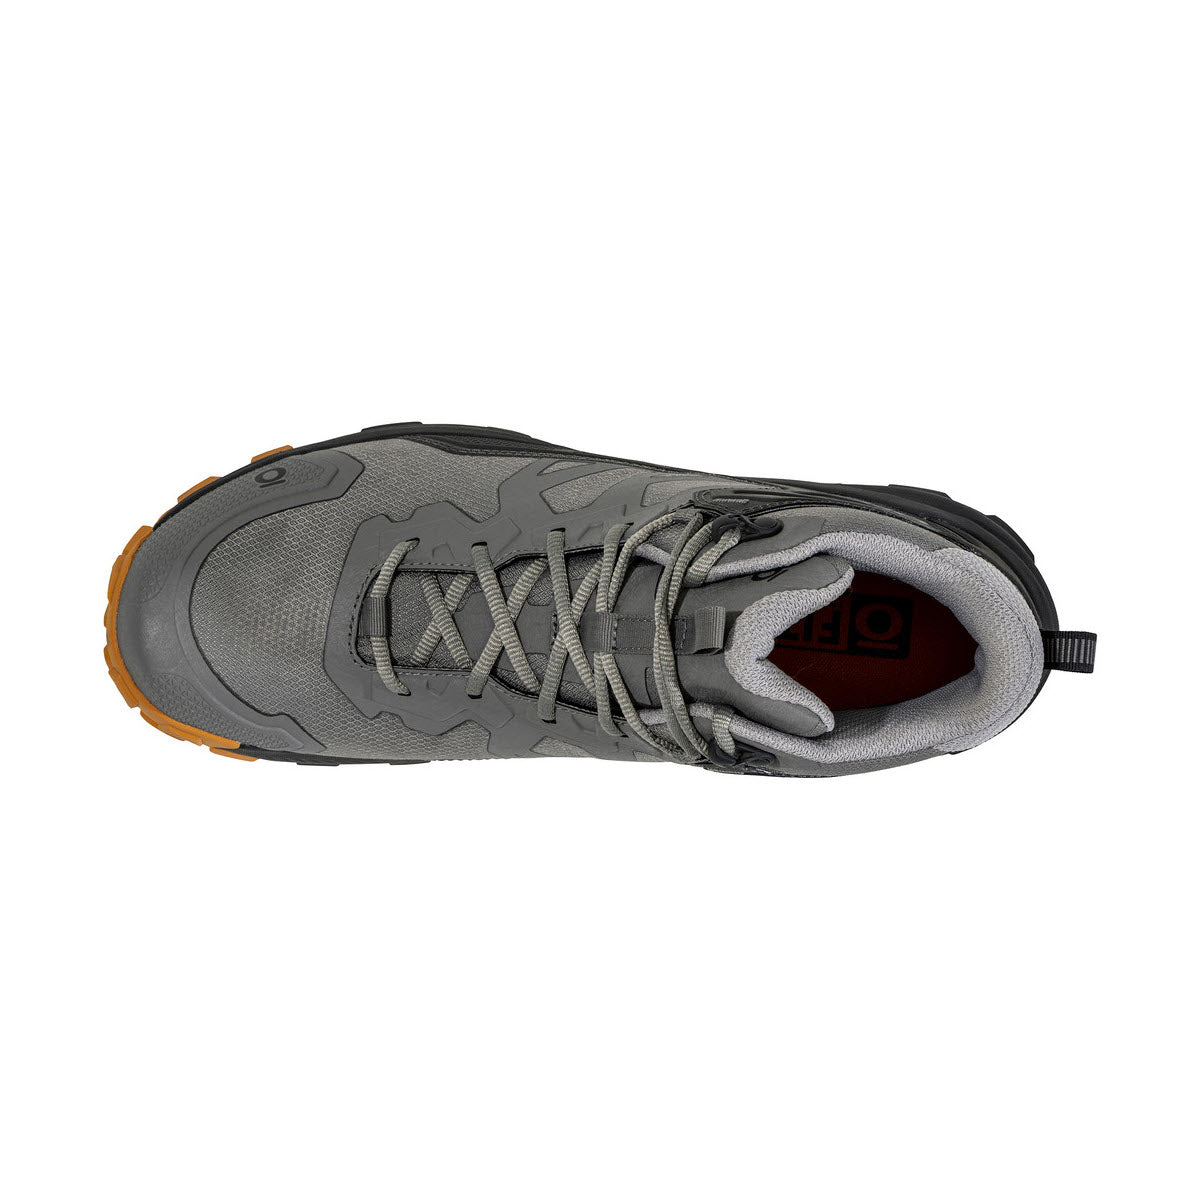 Top view of a gray OBOZ KATABATIC MID B-DRY HAZY GRAY - MENS hiking shoe with orange accents on a white background.